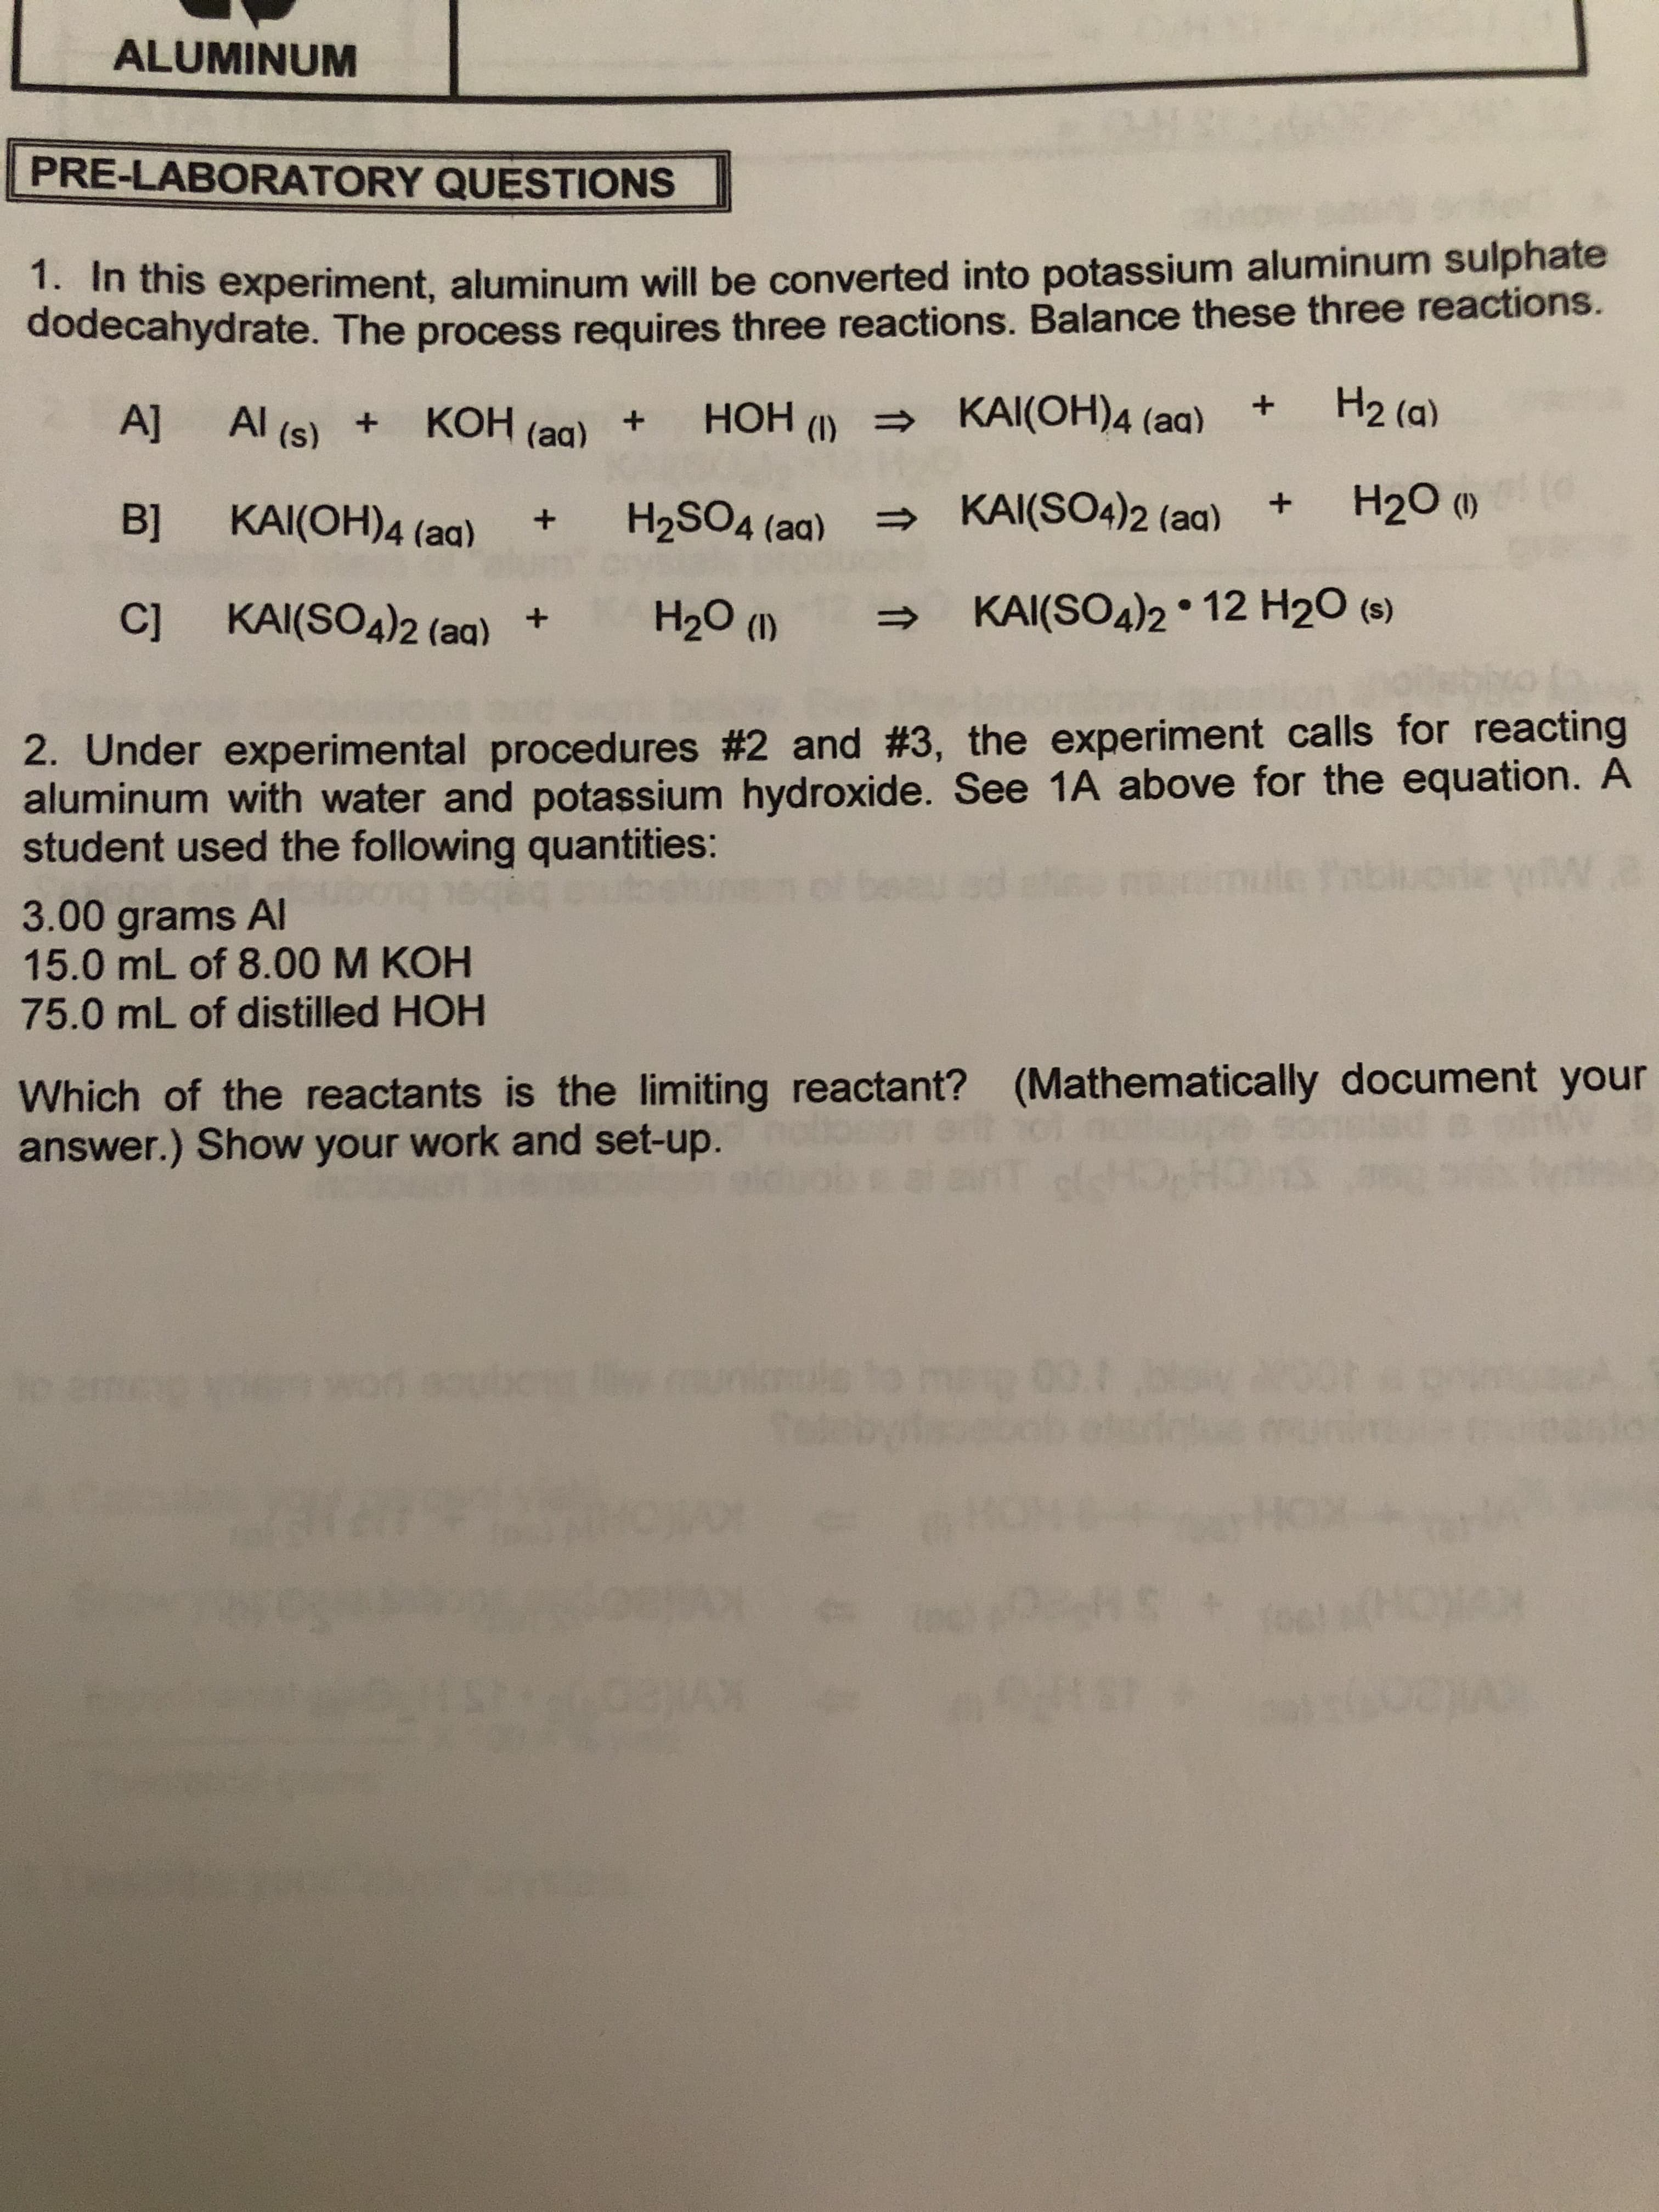 ALUMINUM
WAICG
PRE-LABORATORY QUESTIONS
1. In this experiment, aluminum will be converted into potassium aluminum sulphate
dodecahydrate. The process requires three reactions. Balance these three reactions.
H2 (a)
KAI(OH)4 (aa)
Al (s)
НОН
A]
КОН (ag) +
+
(I)
H20 )
KAI(SO4)2 (aa)
+
H2SO4 (aa)
KAI(OH)4 (aa)
B]
KAI(SO4)2 12 H2O (e)
C] KAI(SO4)2 (aq)
H20 ()
+
2. Under experimental proced ures #2 and # 3, the experiment calls for reacting
aluminum with water and potassium hydroxide. See 1A above for the equation. A
student used the following quantities:
a
3.00 grams Al
15.0 mL of 8.00 M KOH
75.0 mL of distilled HOH
Which of the reactants is the limiting reactant?
answer.) Show your work and set-up.
(Mathematically document your
SHCHP
001
10
(HC
